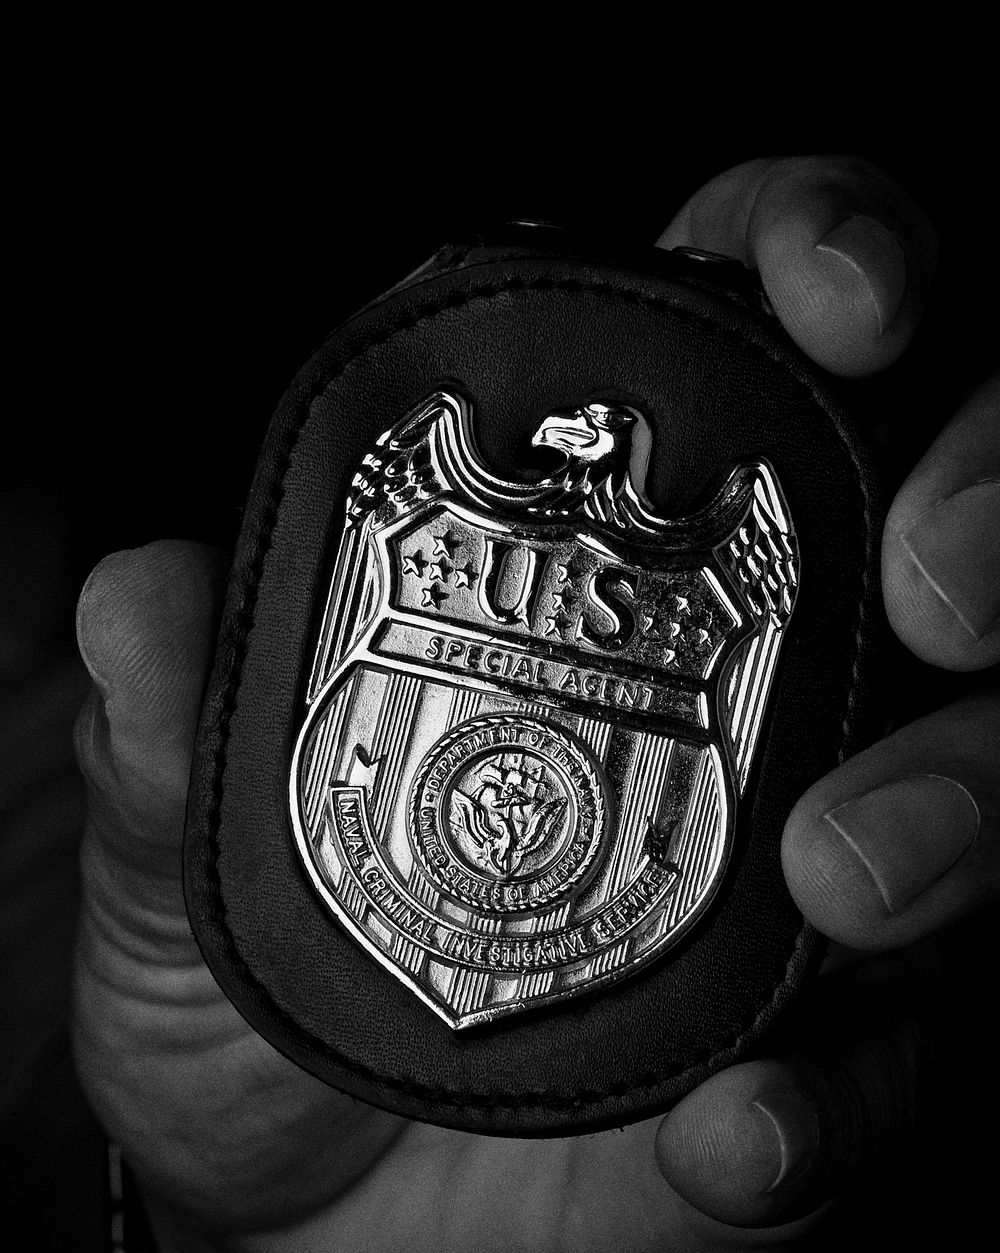 Police special agent badge. Free public domain CC0 photo.